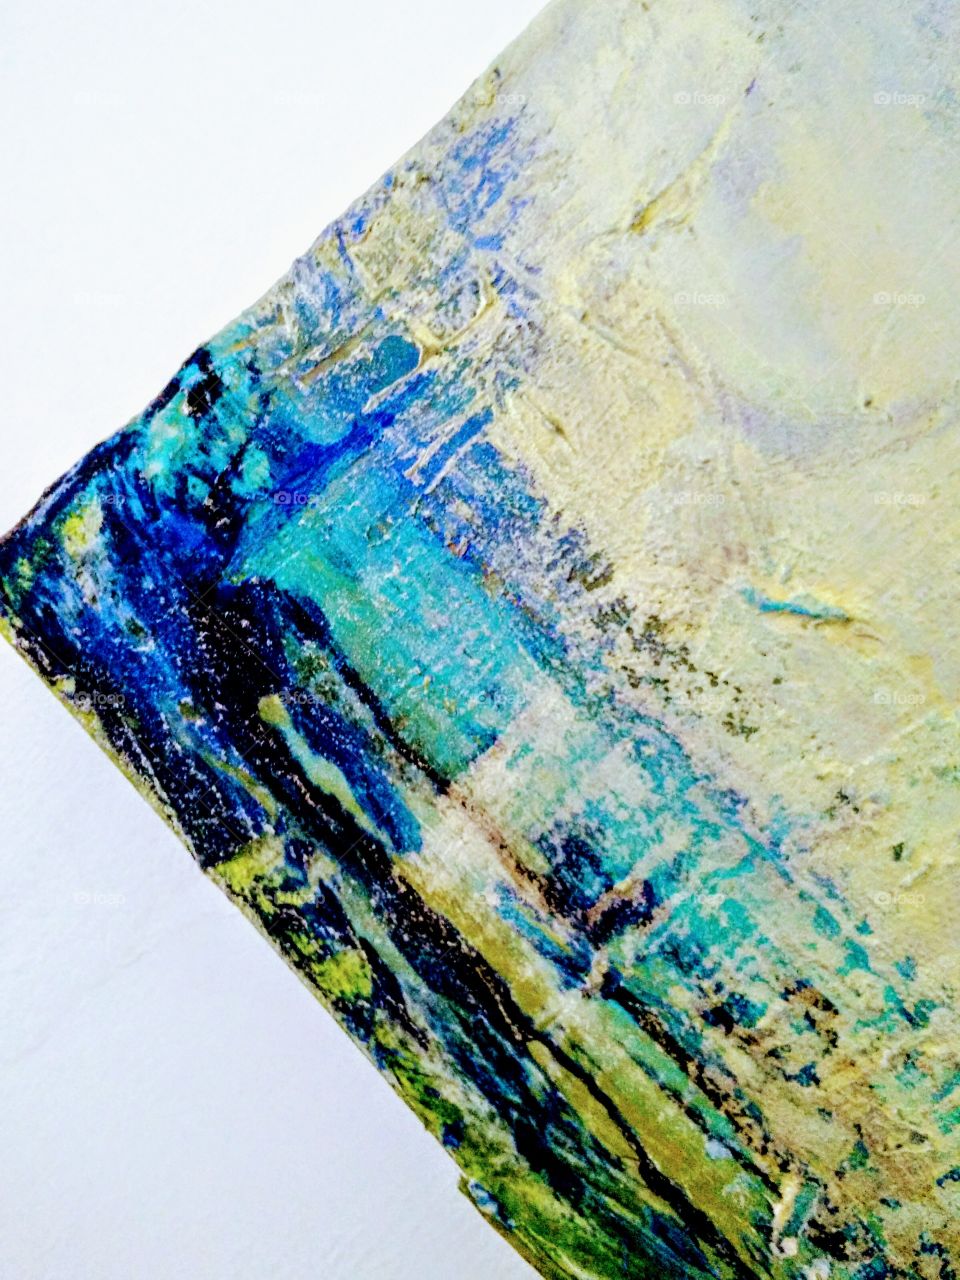 Abstract of layered blue hues paint taken on diagnonal